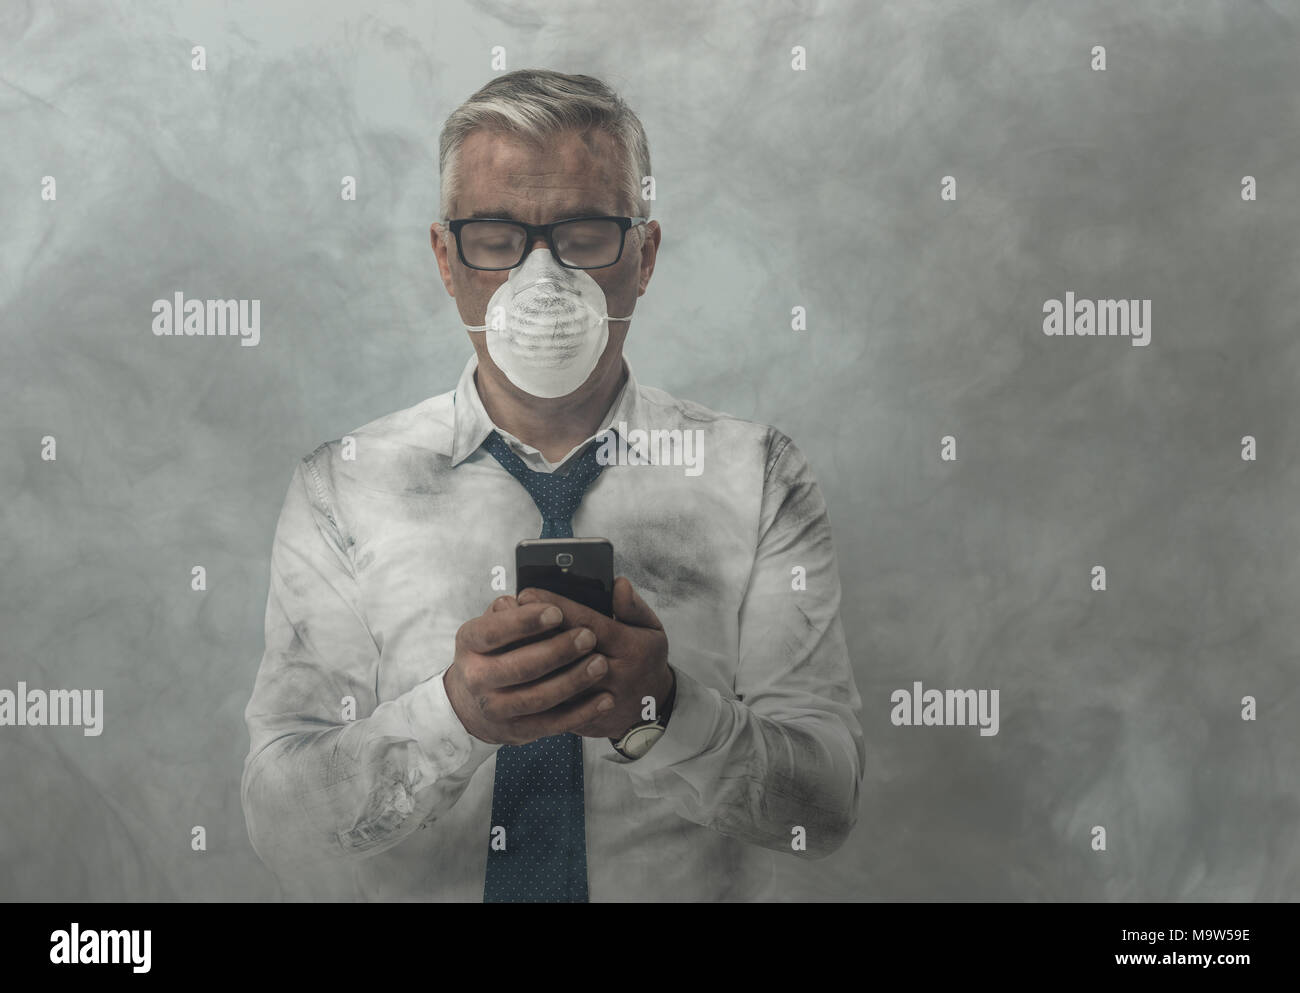 Corporate business executive with protective mask and smog, he is using a smartphone Stock Photo